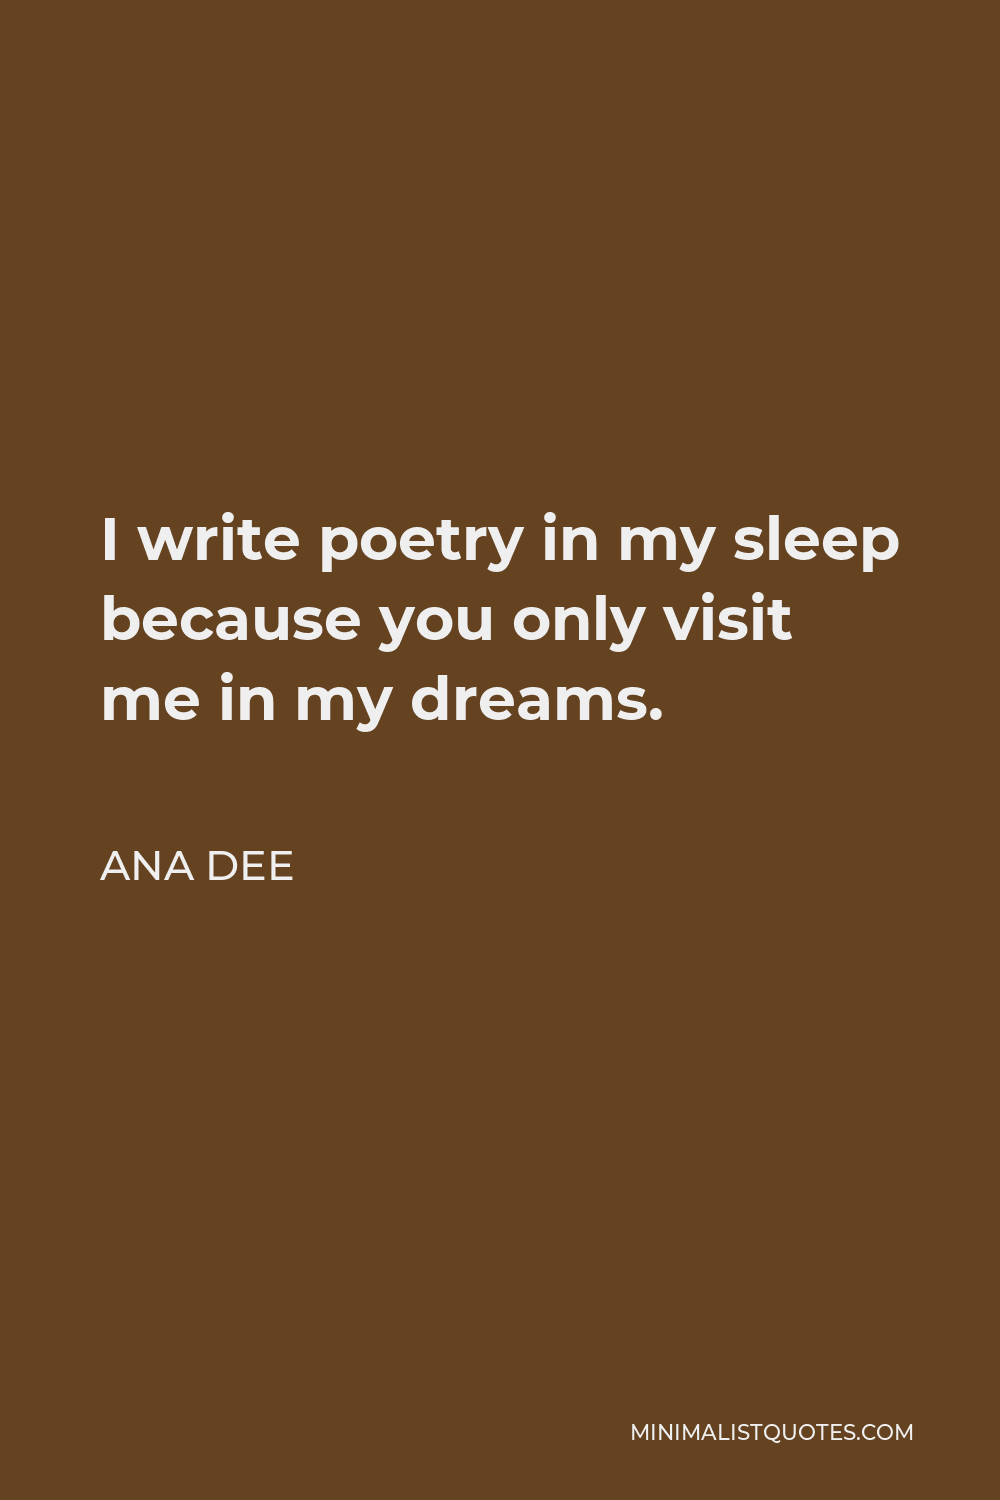 Ana Dee Quote - I write poetry in my sleep because you only visit me in my dreams.